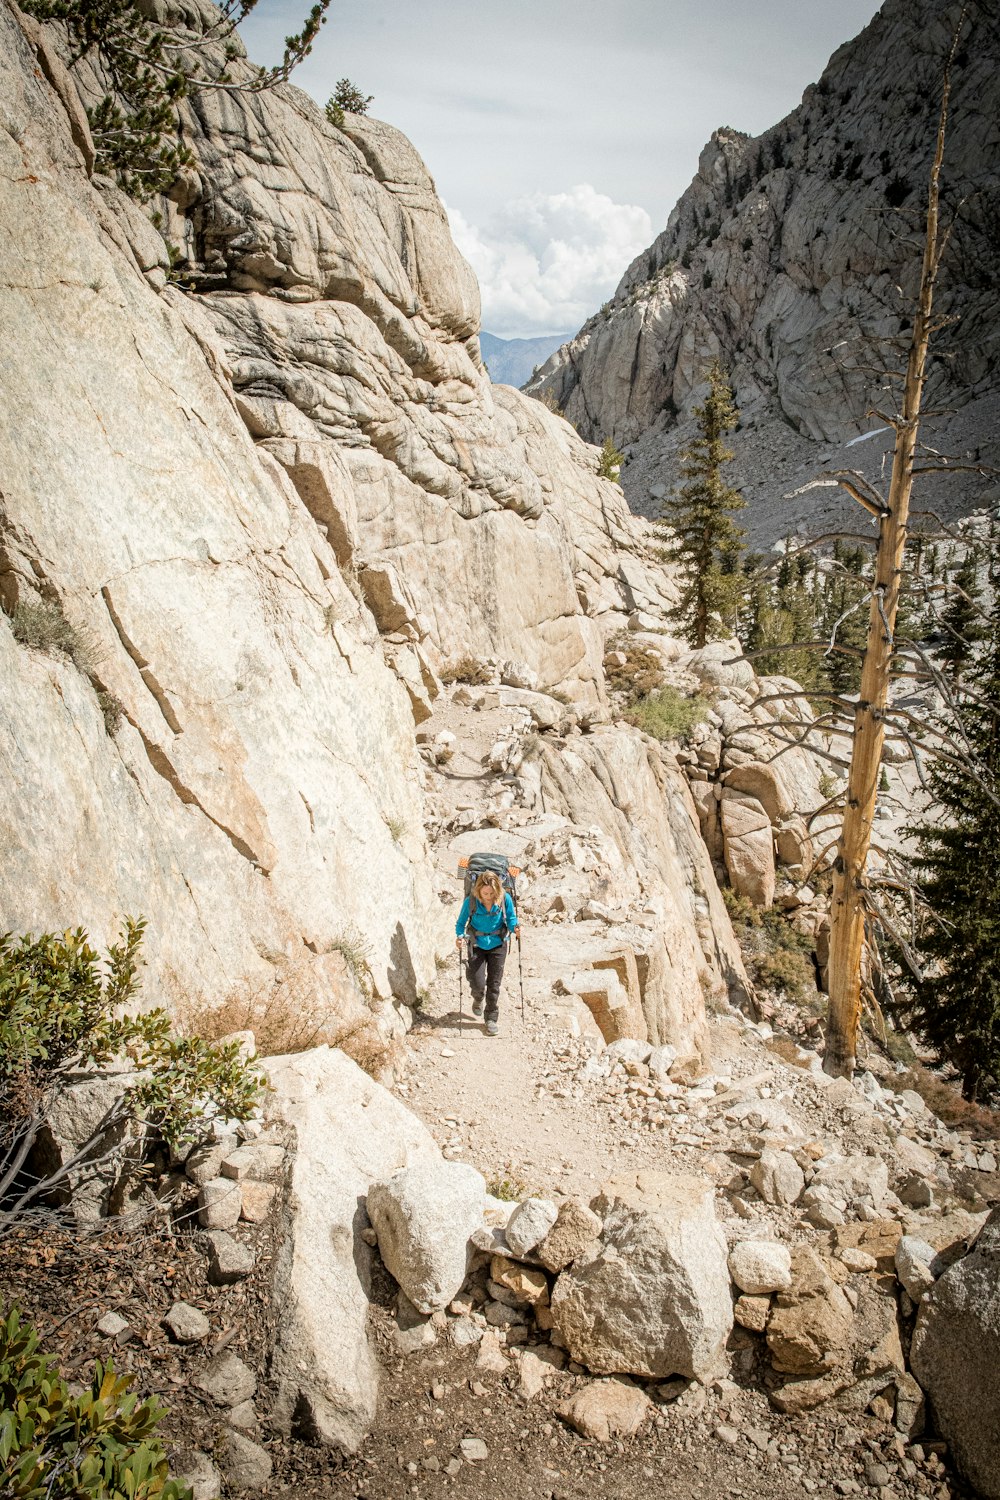 a person hiking up a rocky trail in the mountains